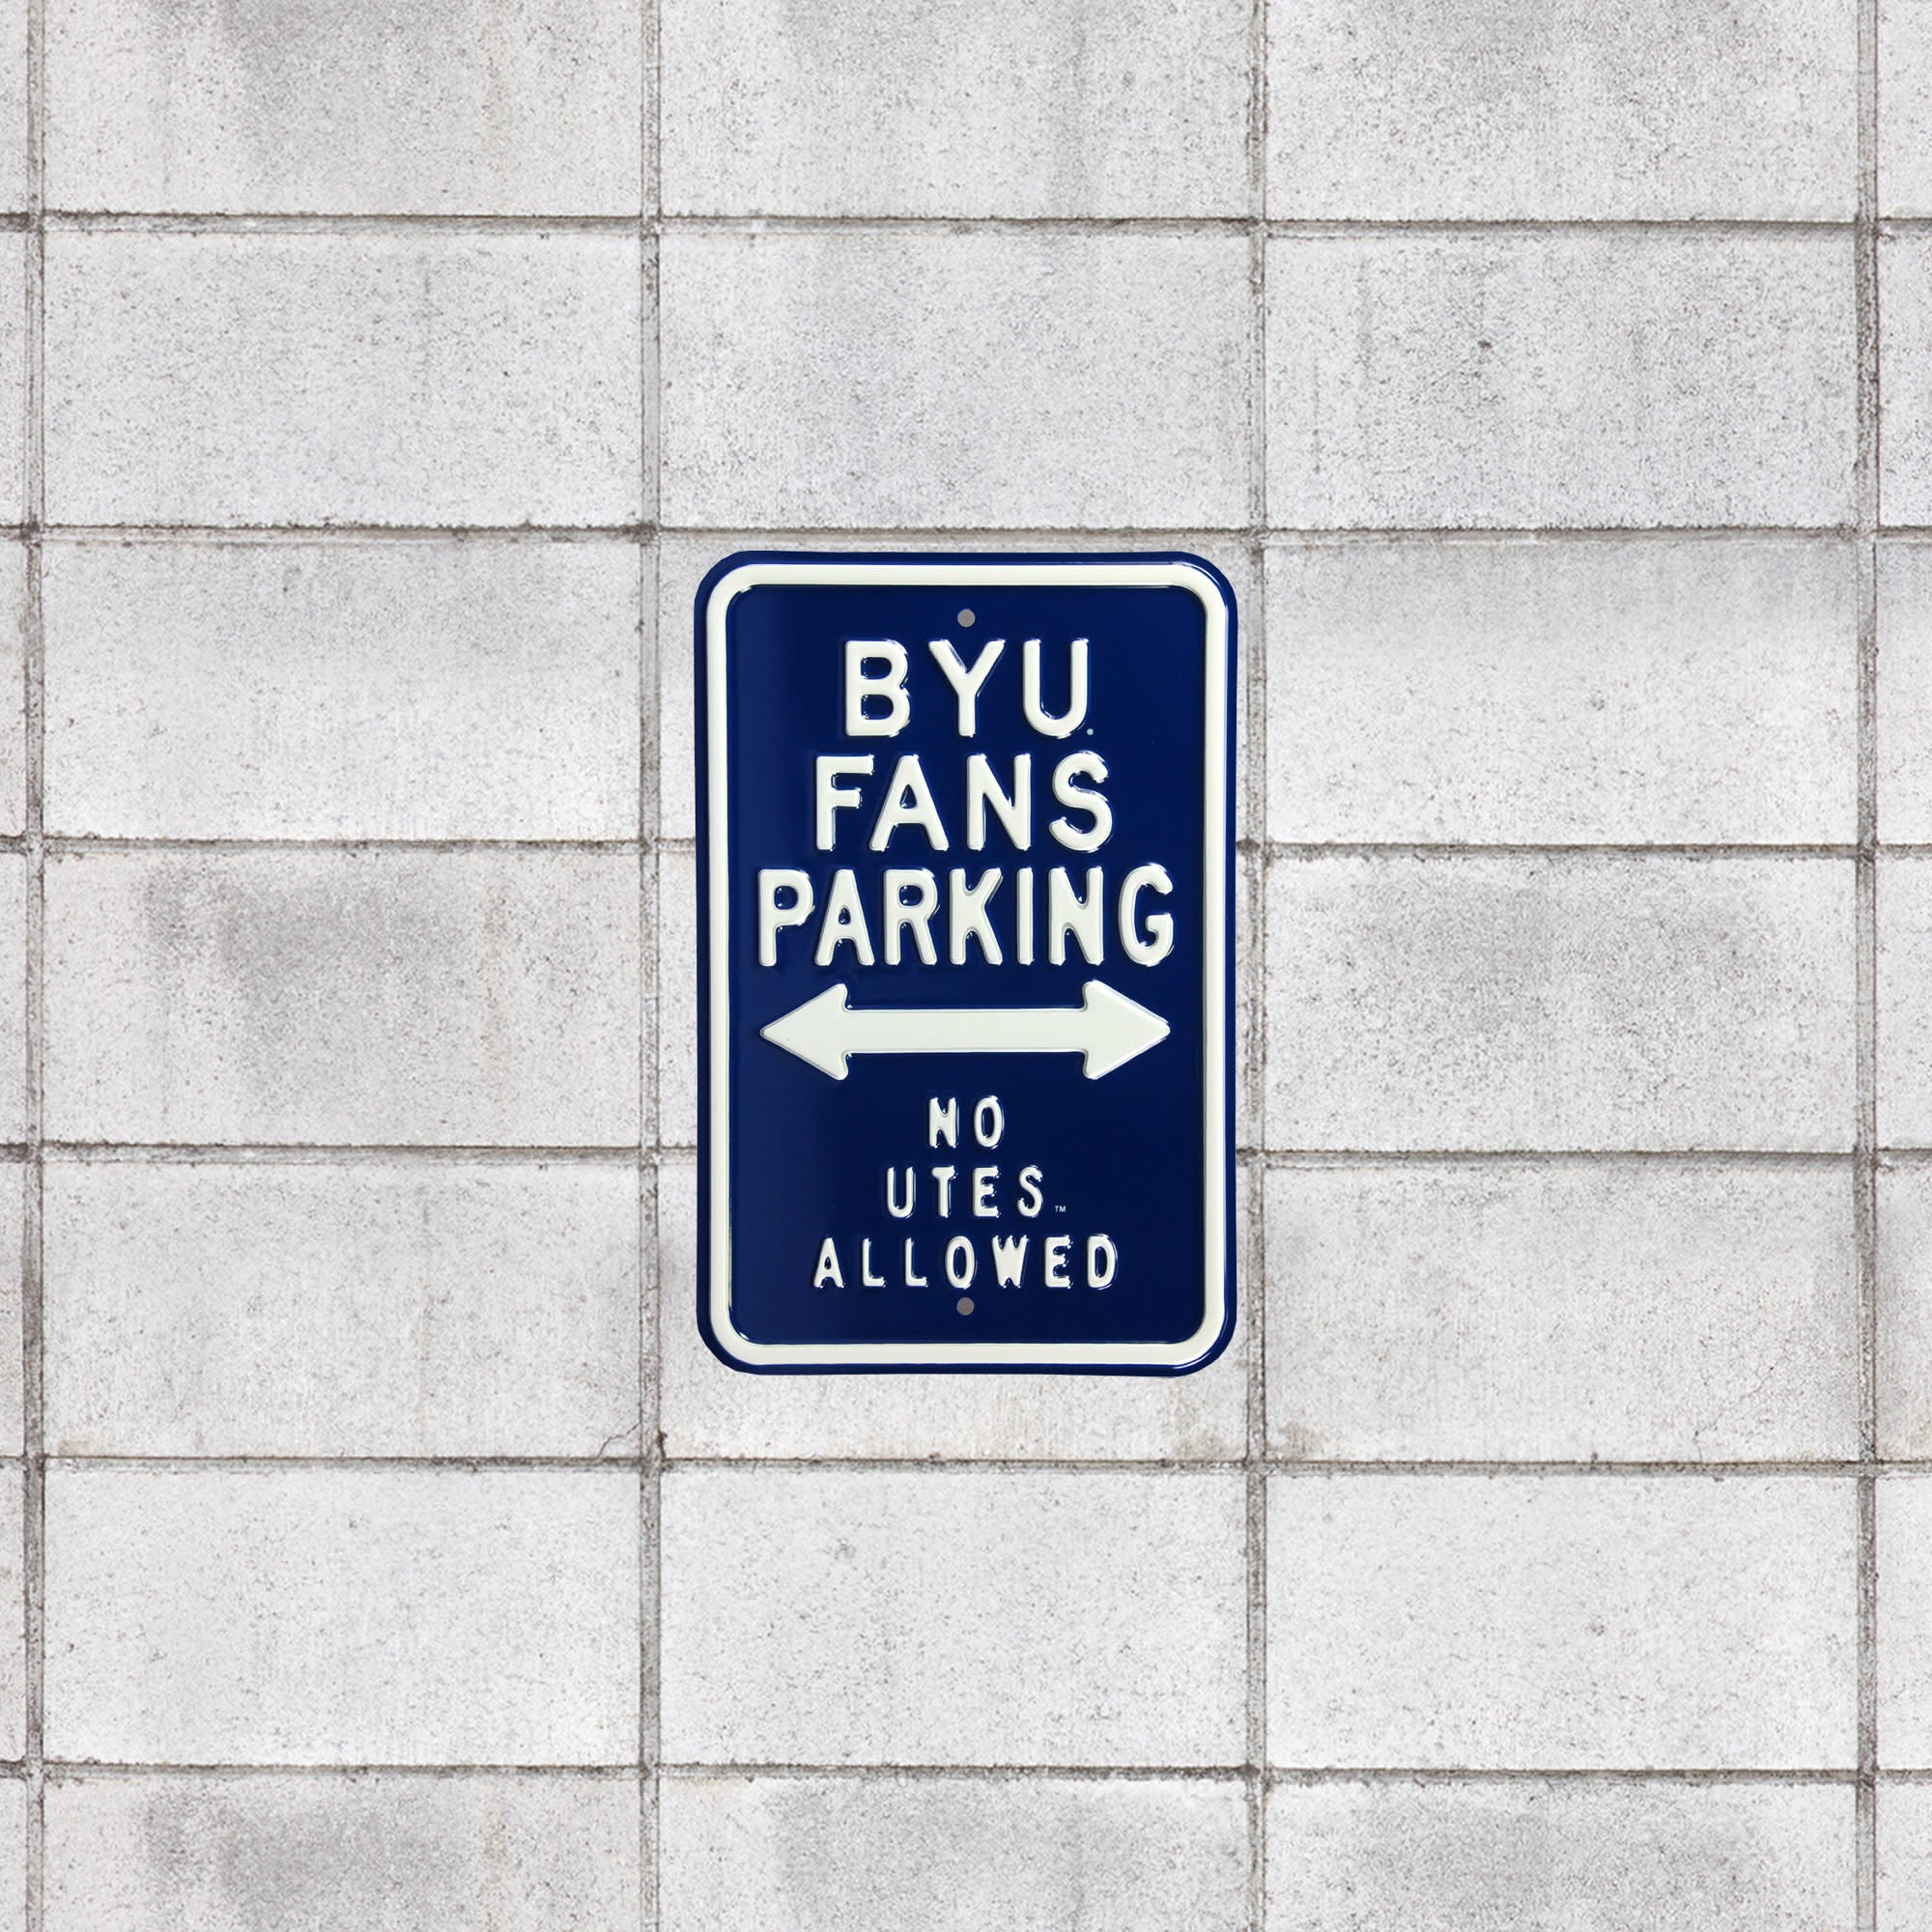 BYU Cougars: No Utes Parking - Officially Licensed Metal Street Sign 18.0"W x 12.0"H by Fathead | 100% Steel